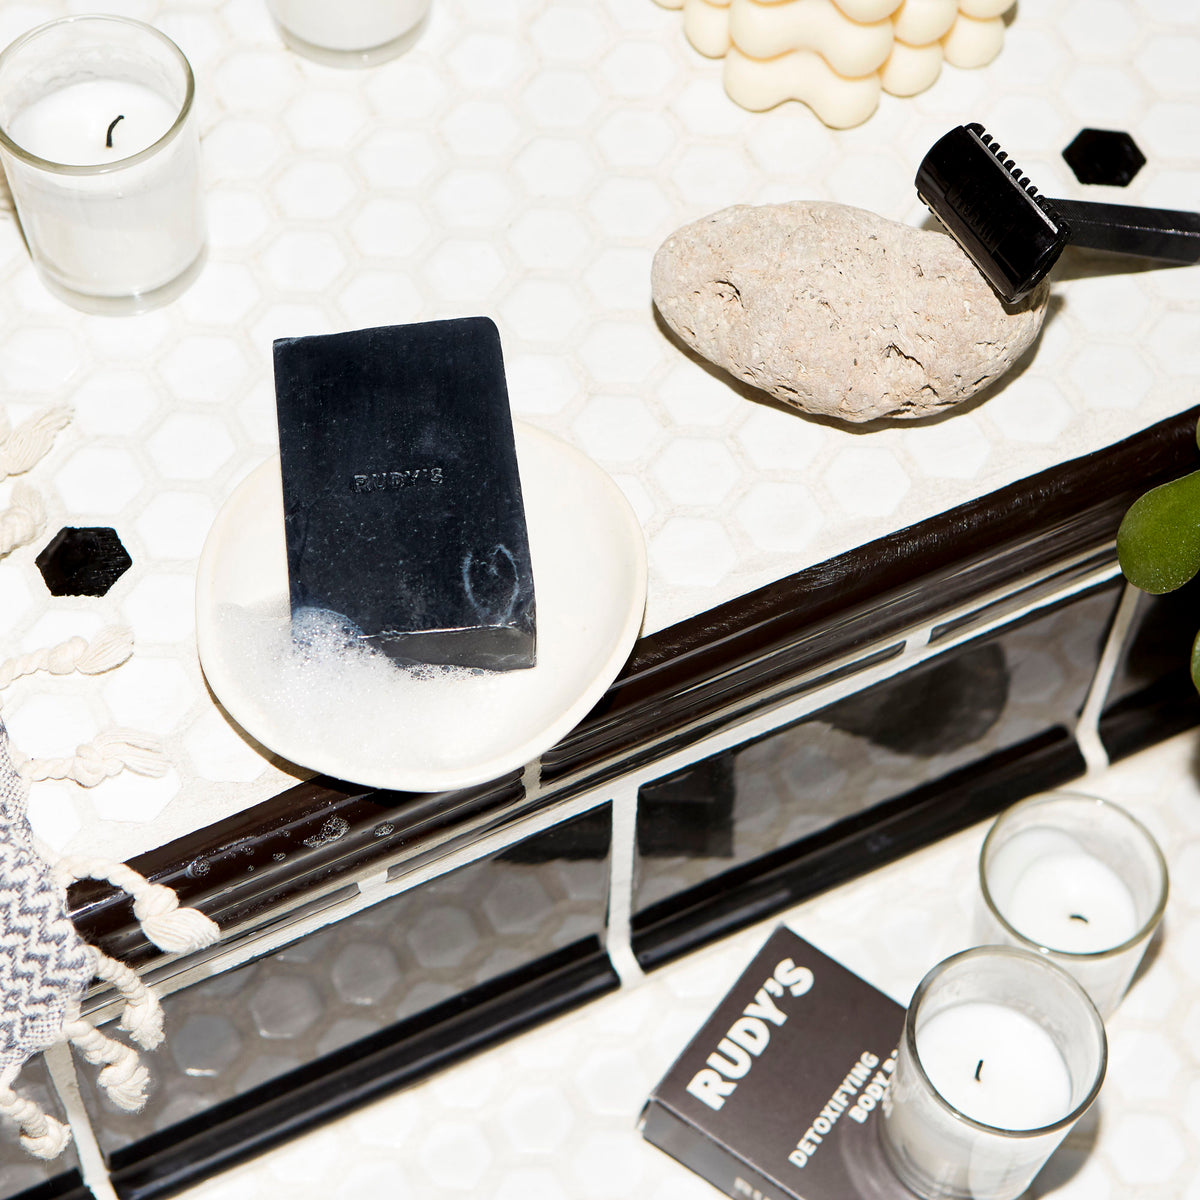 Bar of Black soap in dish on bathroom kitchen with candles and razor displayed around.